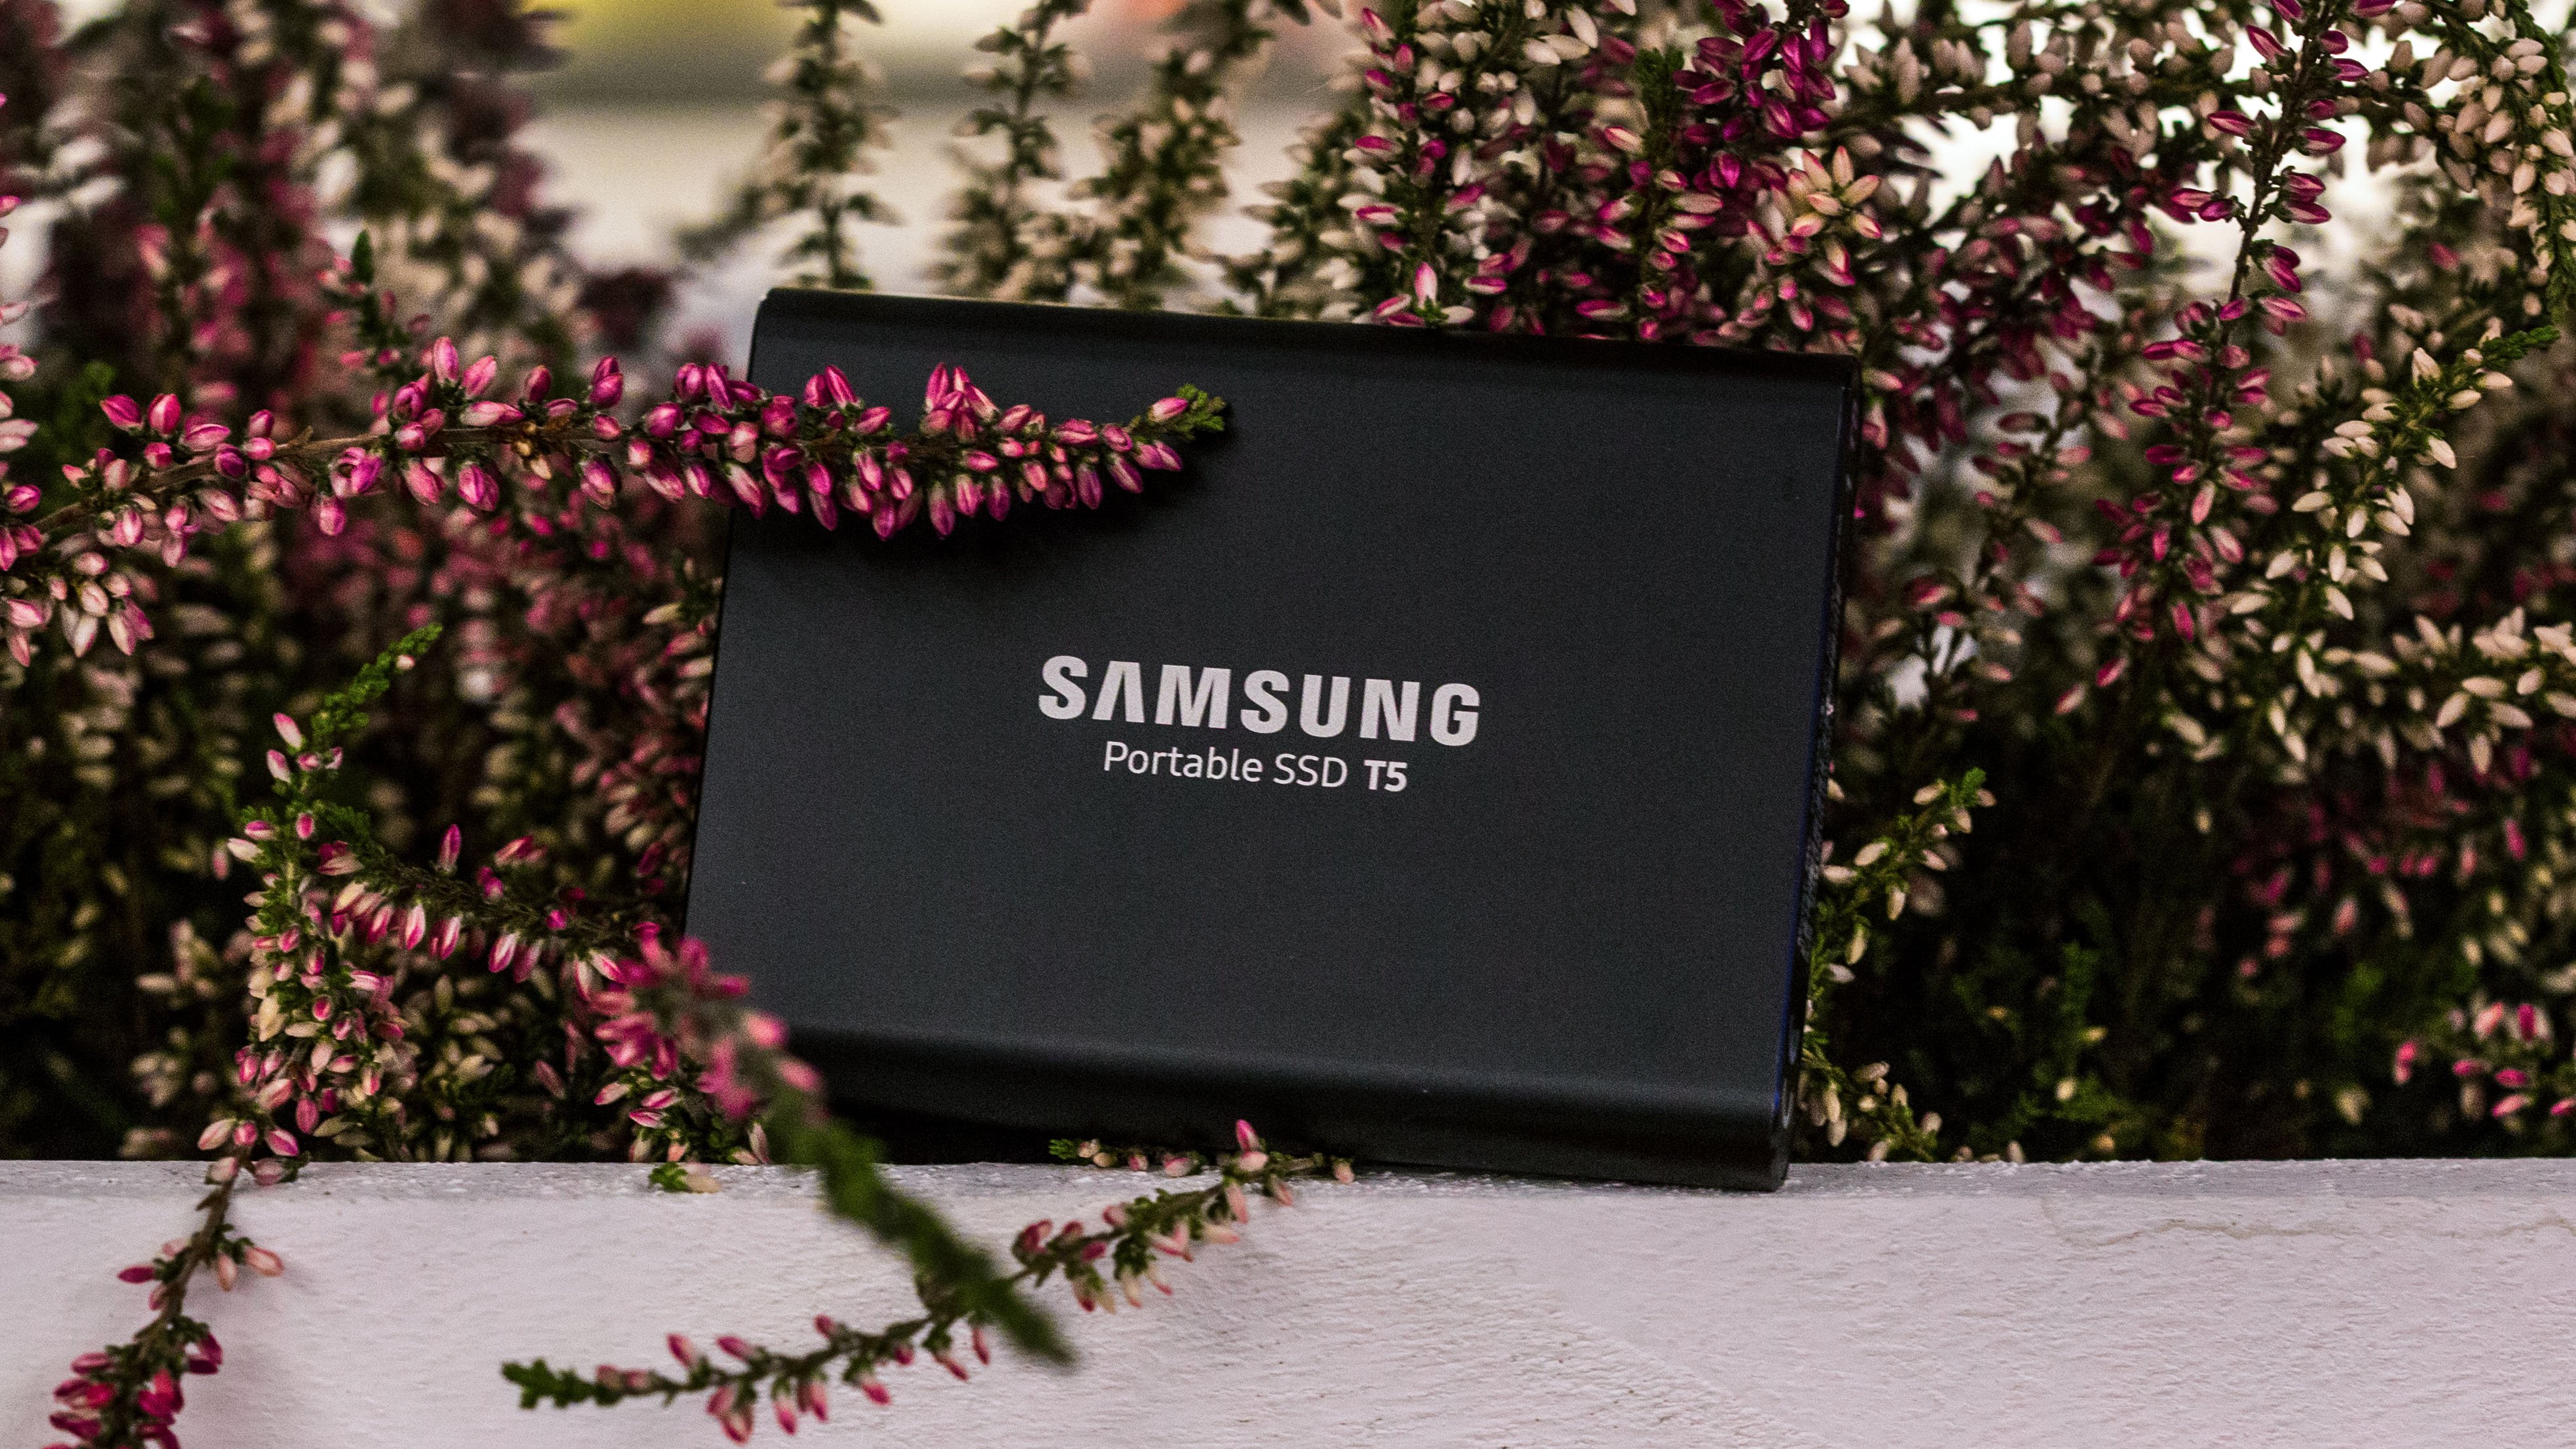 How to connect a Samsung T5 SSD to an Android Phone